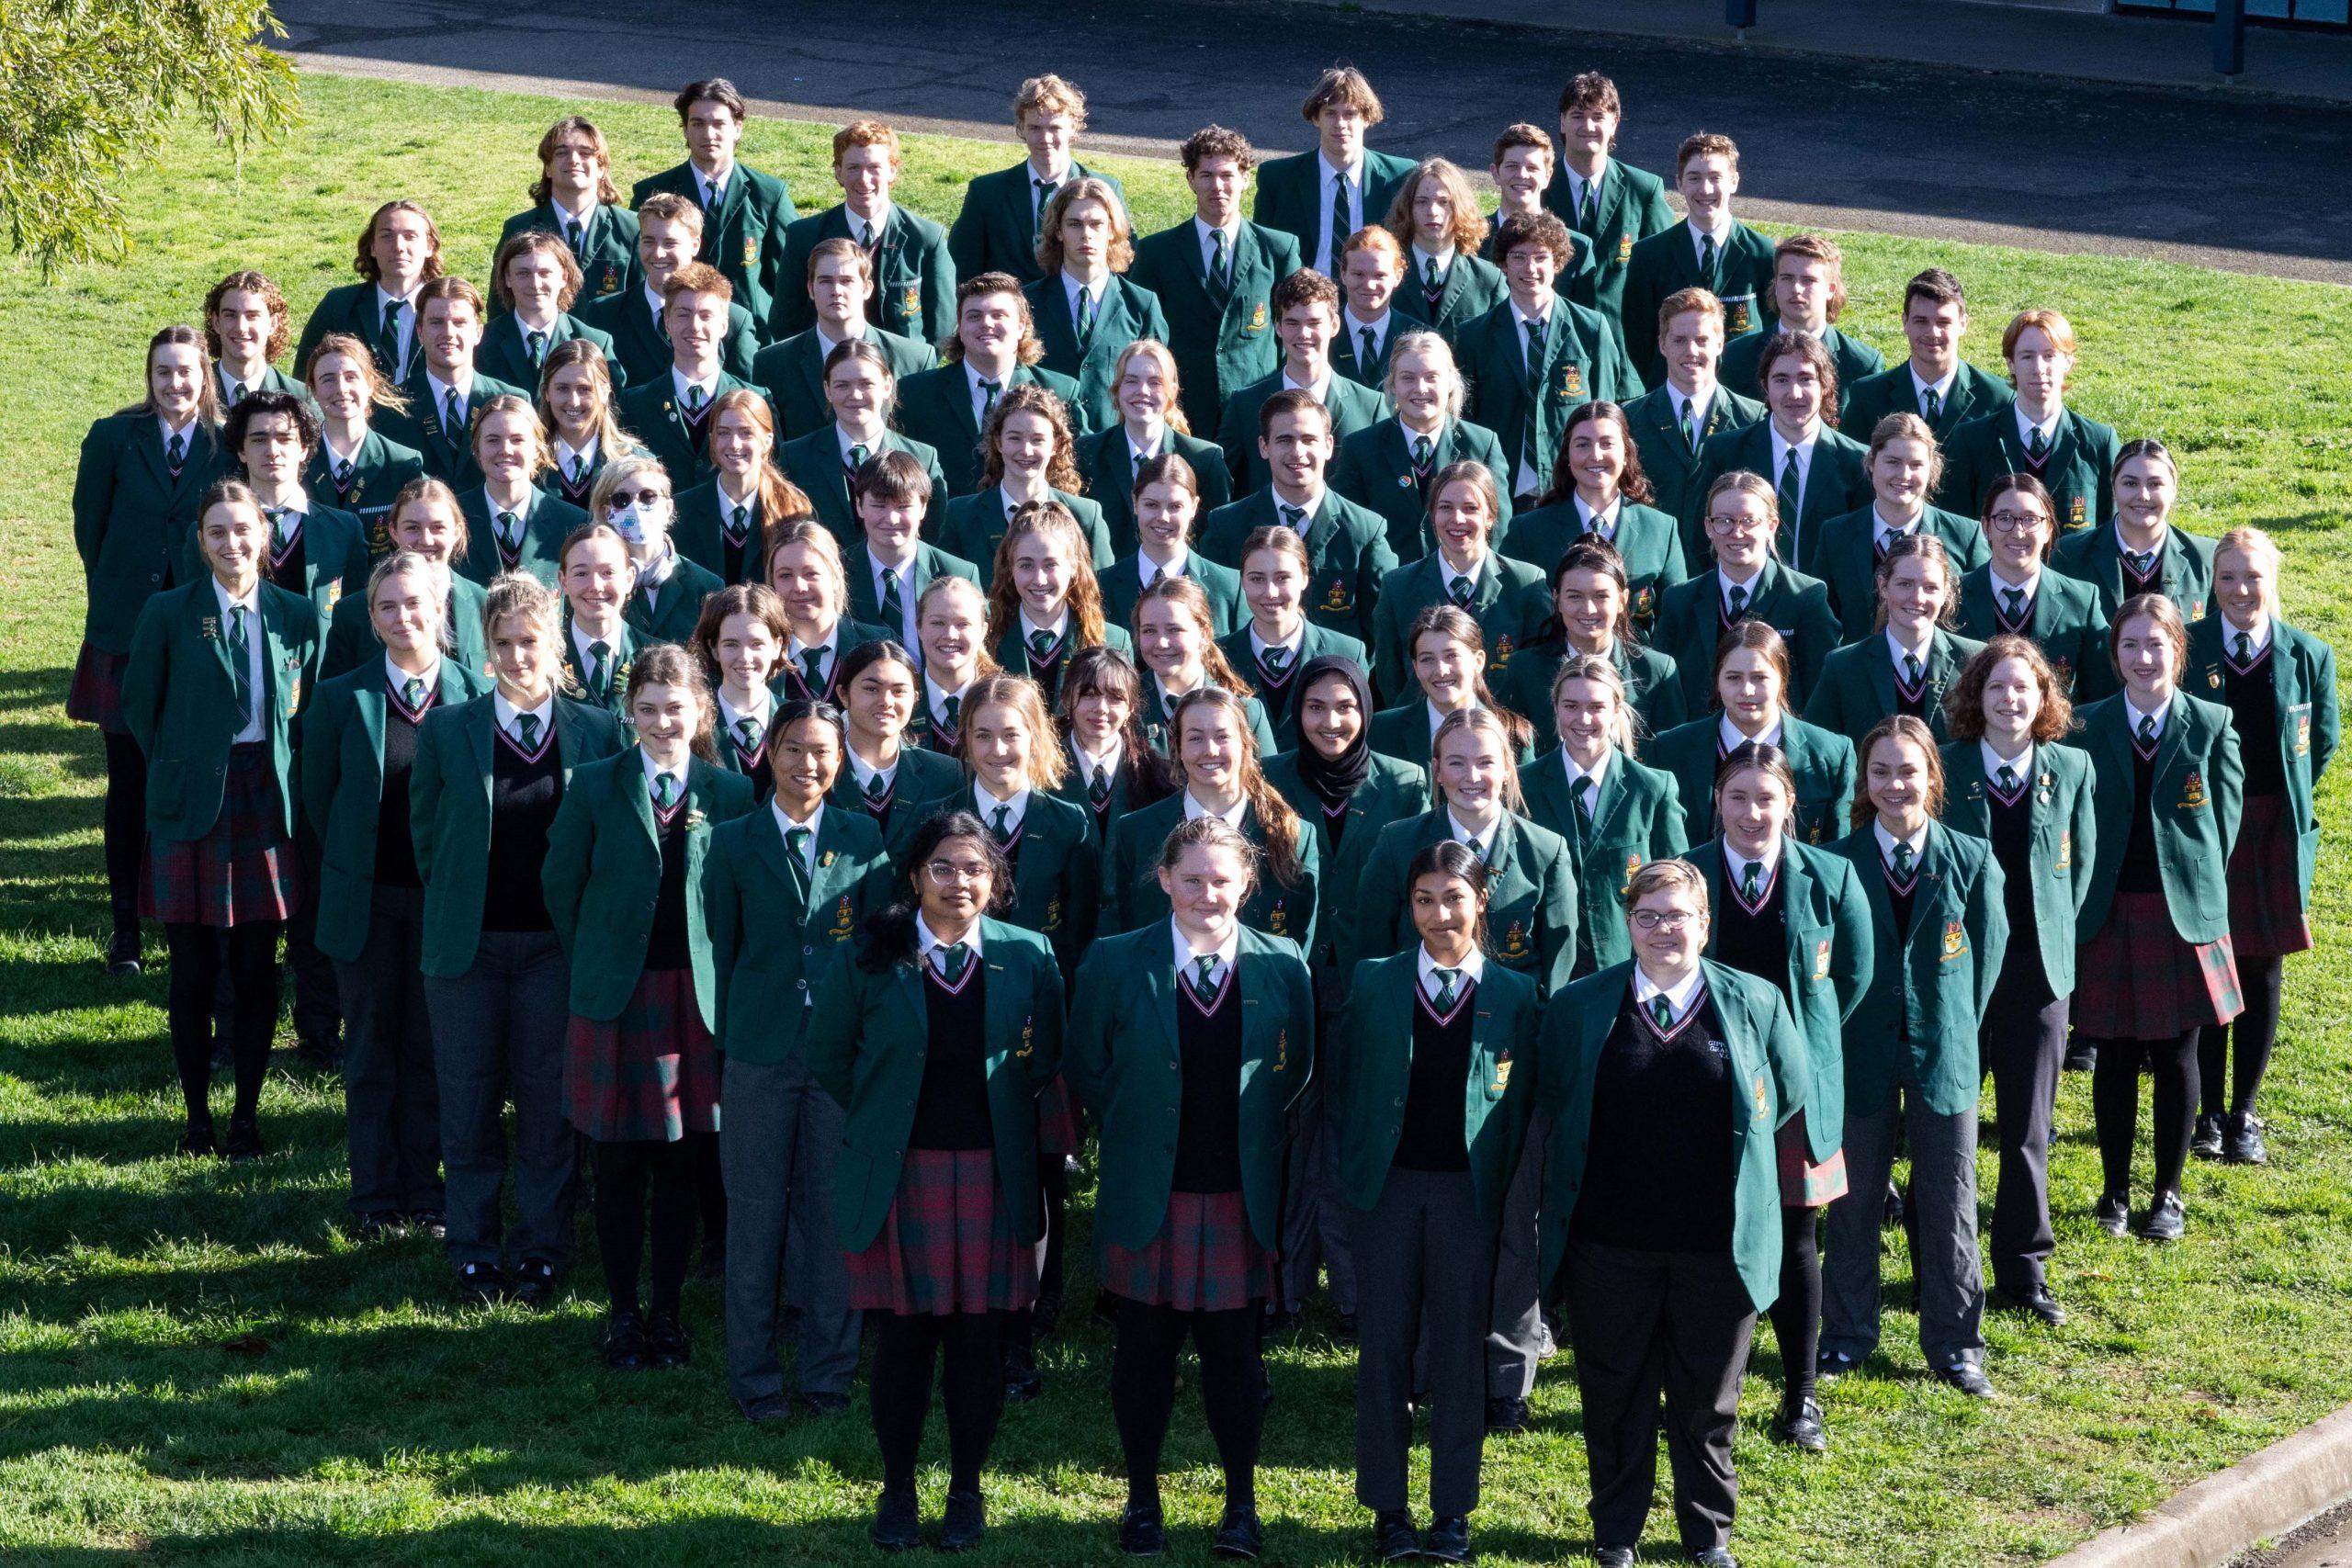 Gippsland Grammar’s ‘Class of 2022’ Year 12 cohort received their VCE results on Monday December 12.